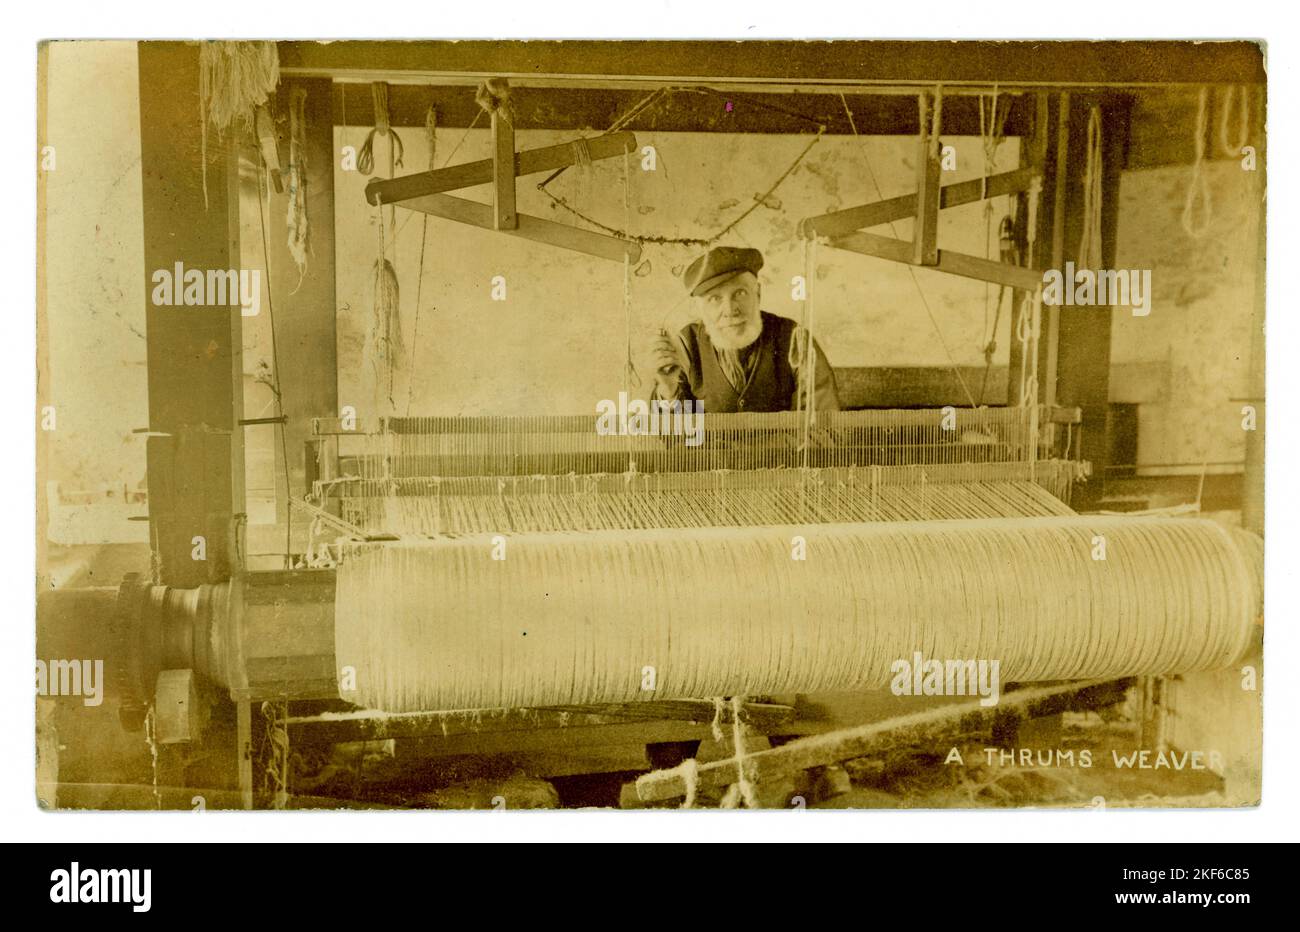 Original Edwardian postcard of an older Scottish man who is a Thrums Weaver -  a cottage worker probably, working from home on a wooden loom, maybe rugmaking. Thrums are offcuts from carpet weaving industry, they were cheap so this man is likely to be poor. Postcard is dated /  posted on 5 Feb 1907 from Kirriemuir, Angus, Scotland, Stock Photo